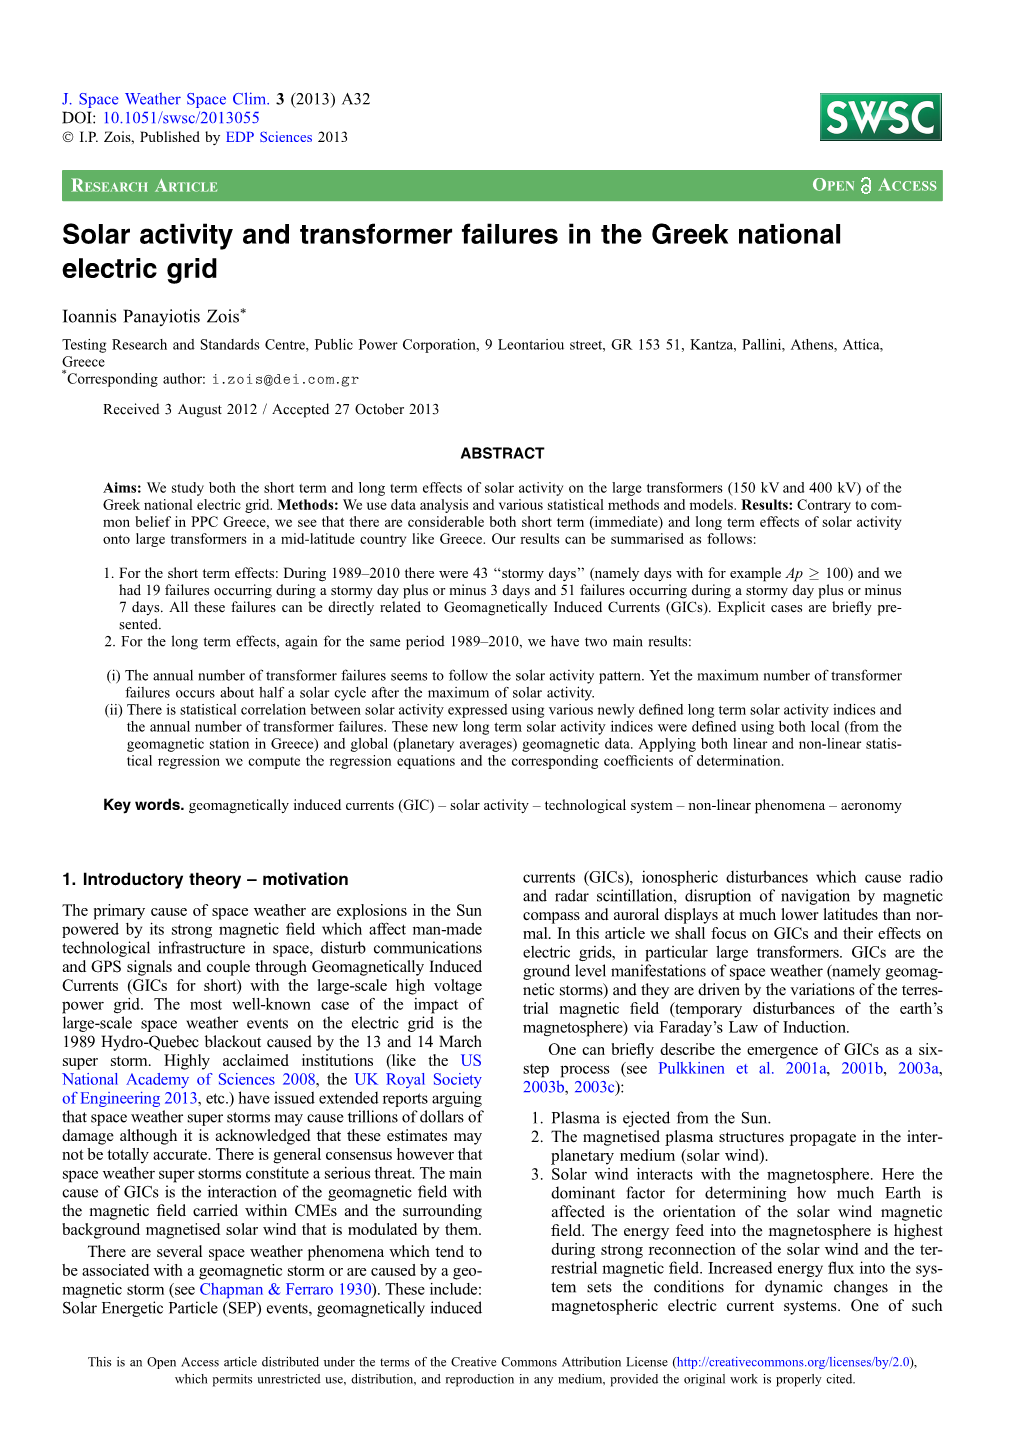 Solar Activity and Transformer Failures in the Greek National Electric Grid